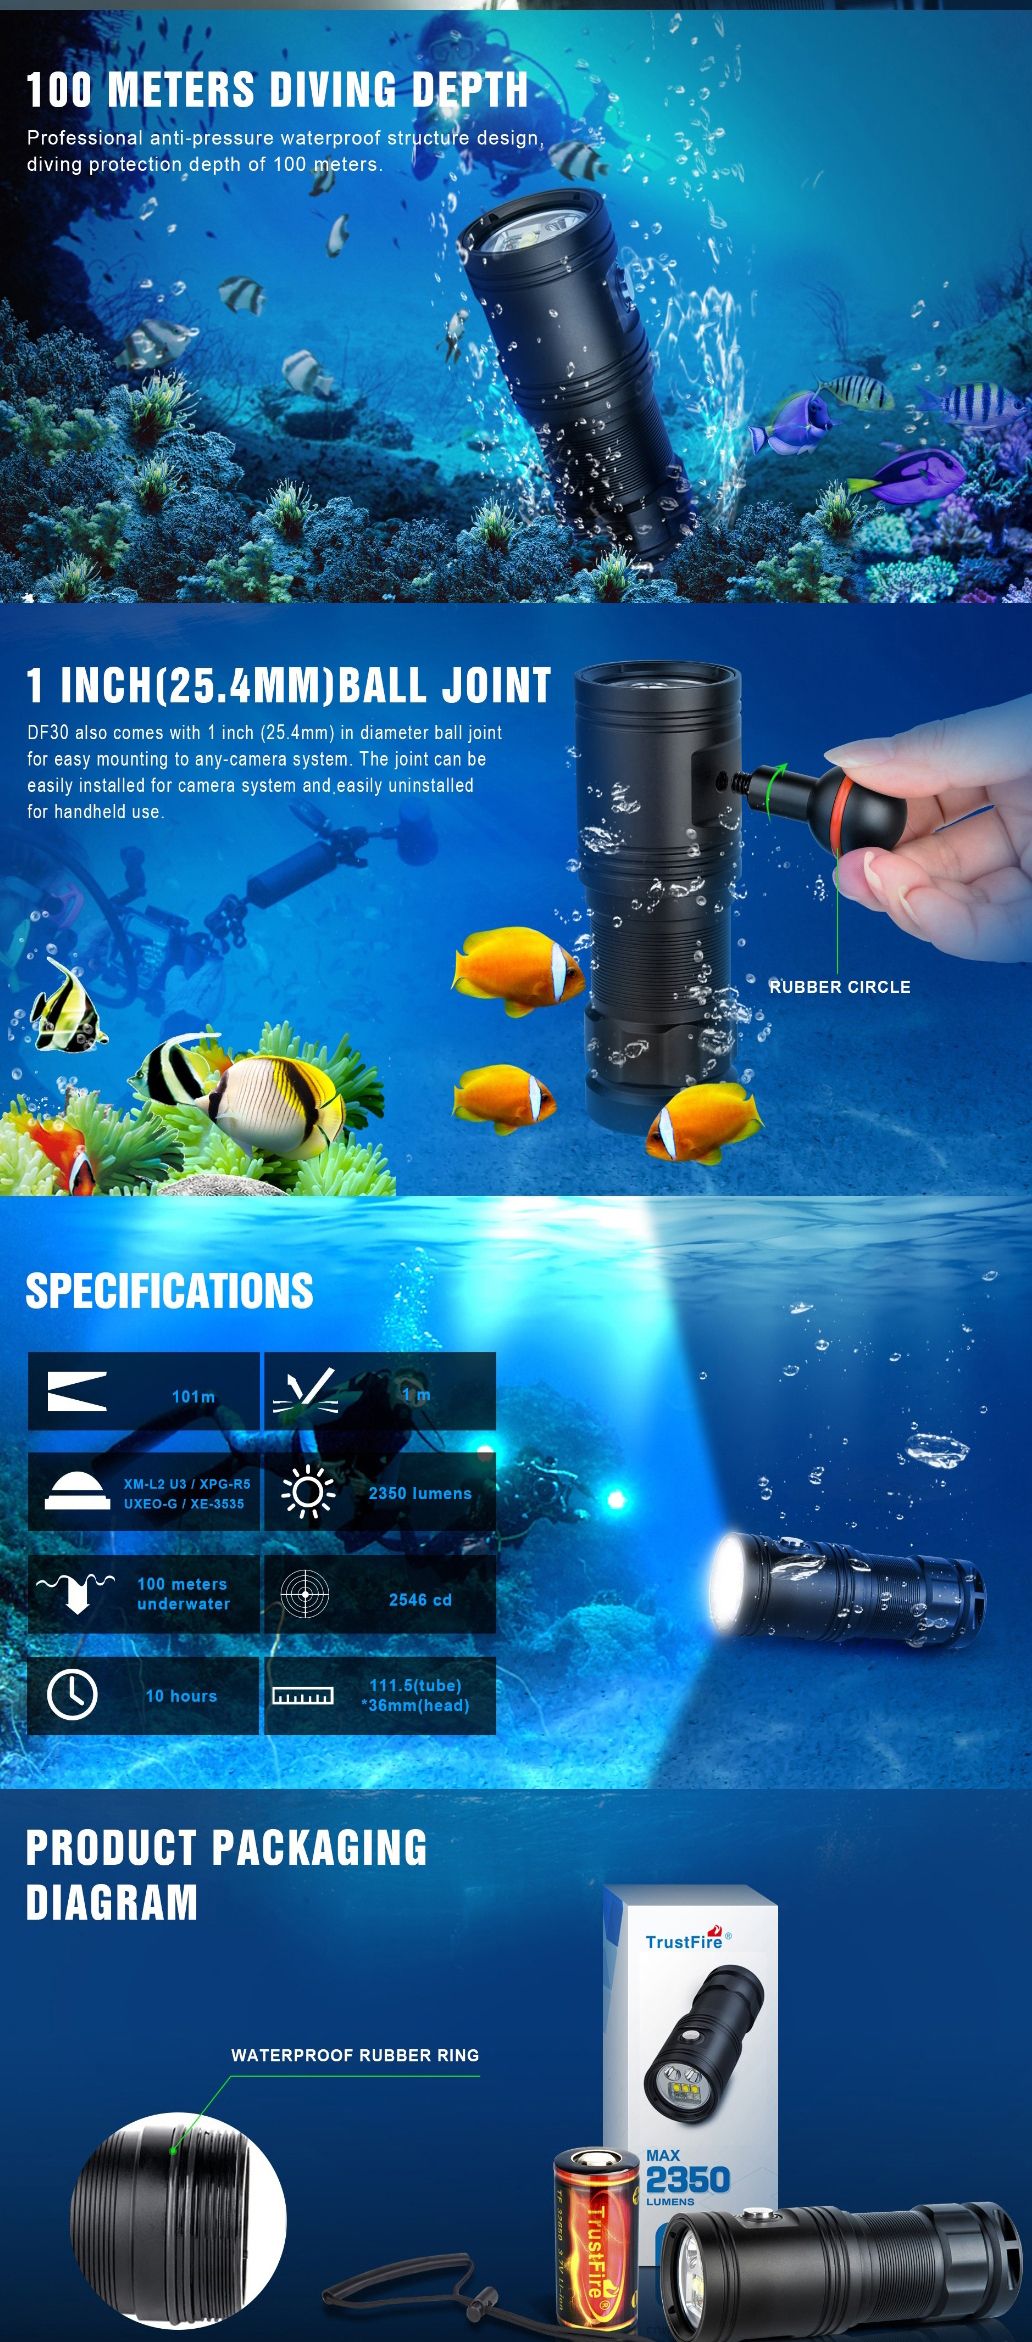 Trustfire-DF30-2350lm-Rechargeable-Dive-Flashlight-Underwater-Diving-Photo-Video-Flashlight-1535613